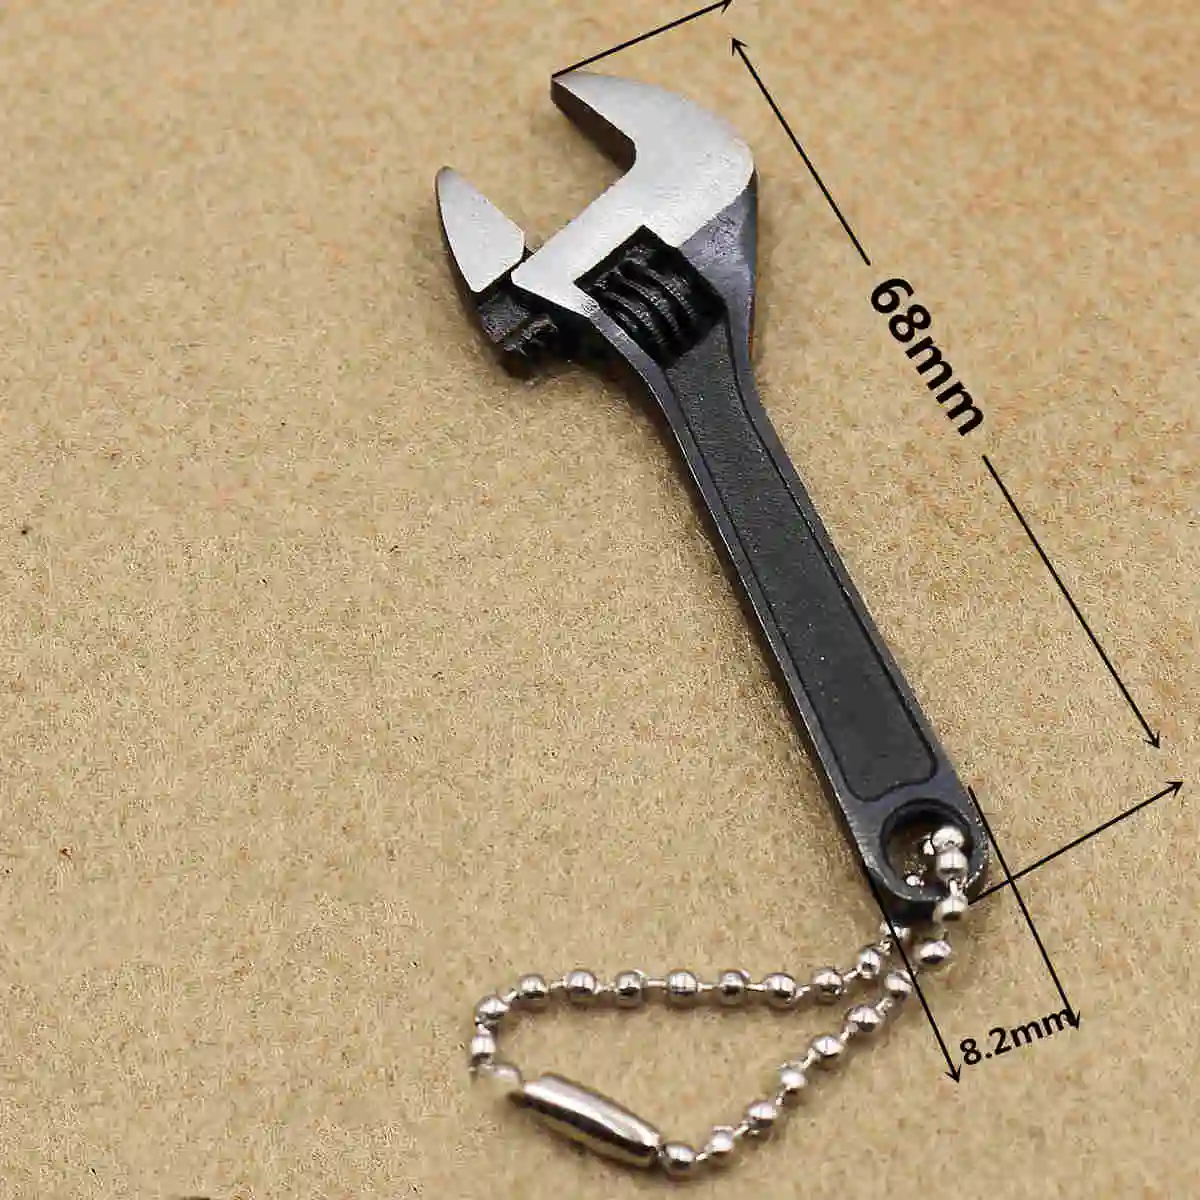 Details about   Black 66mm 2.5" Inch mini Metal Adjustable Wrenches Hand Tool 0-10mm Jaw Wrench 